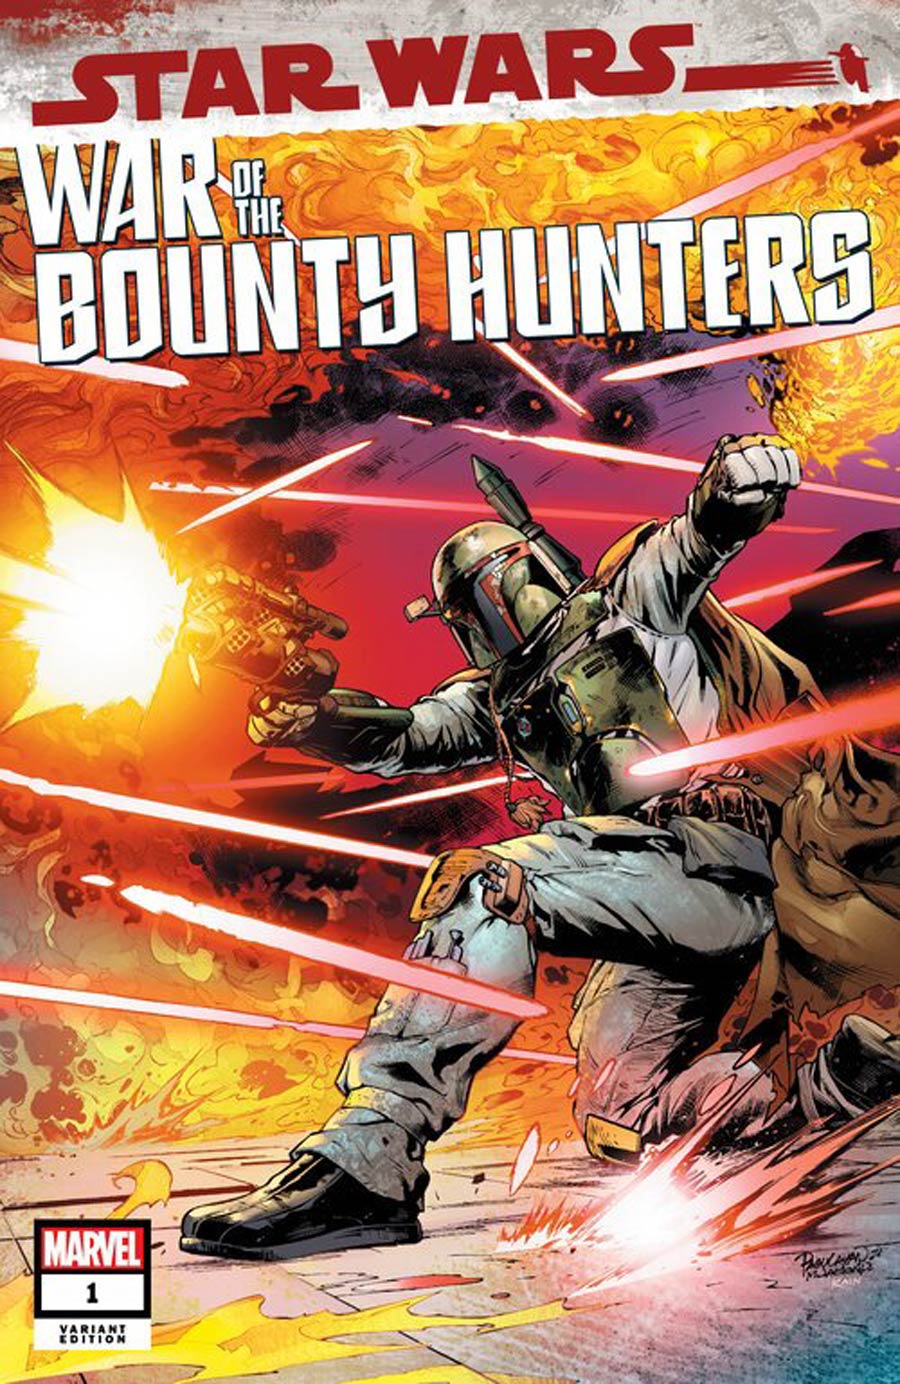 Star Wars War Of The Bounty Hunters #1 Cover M Scorpion Comics Variant Cover